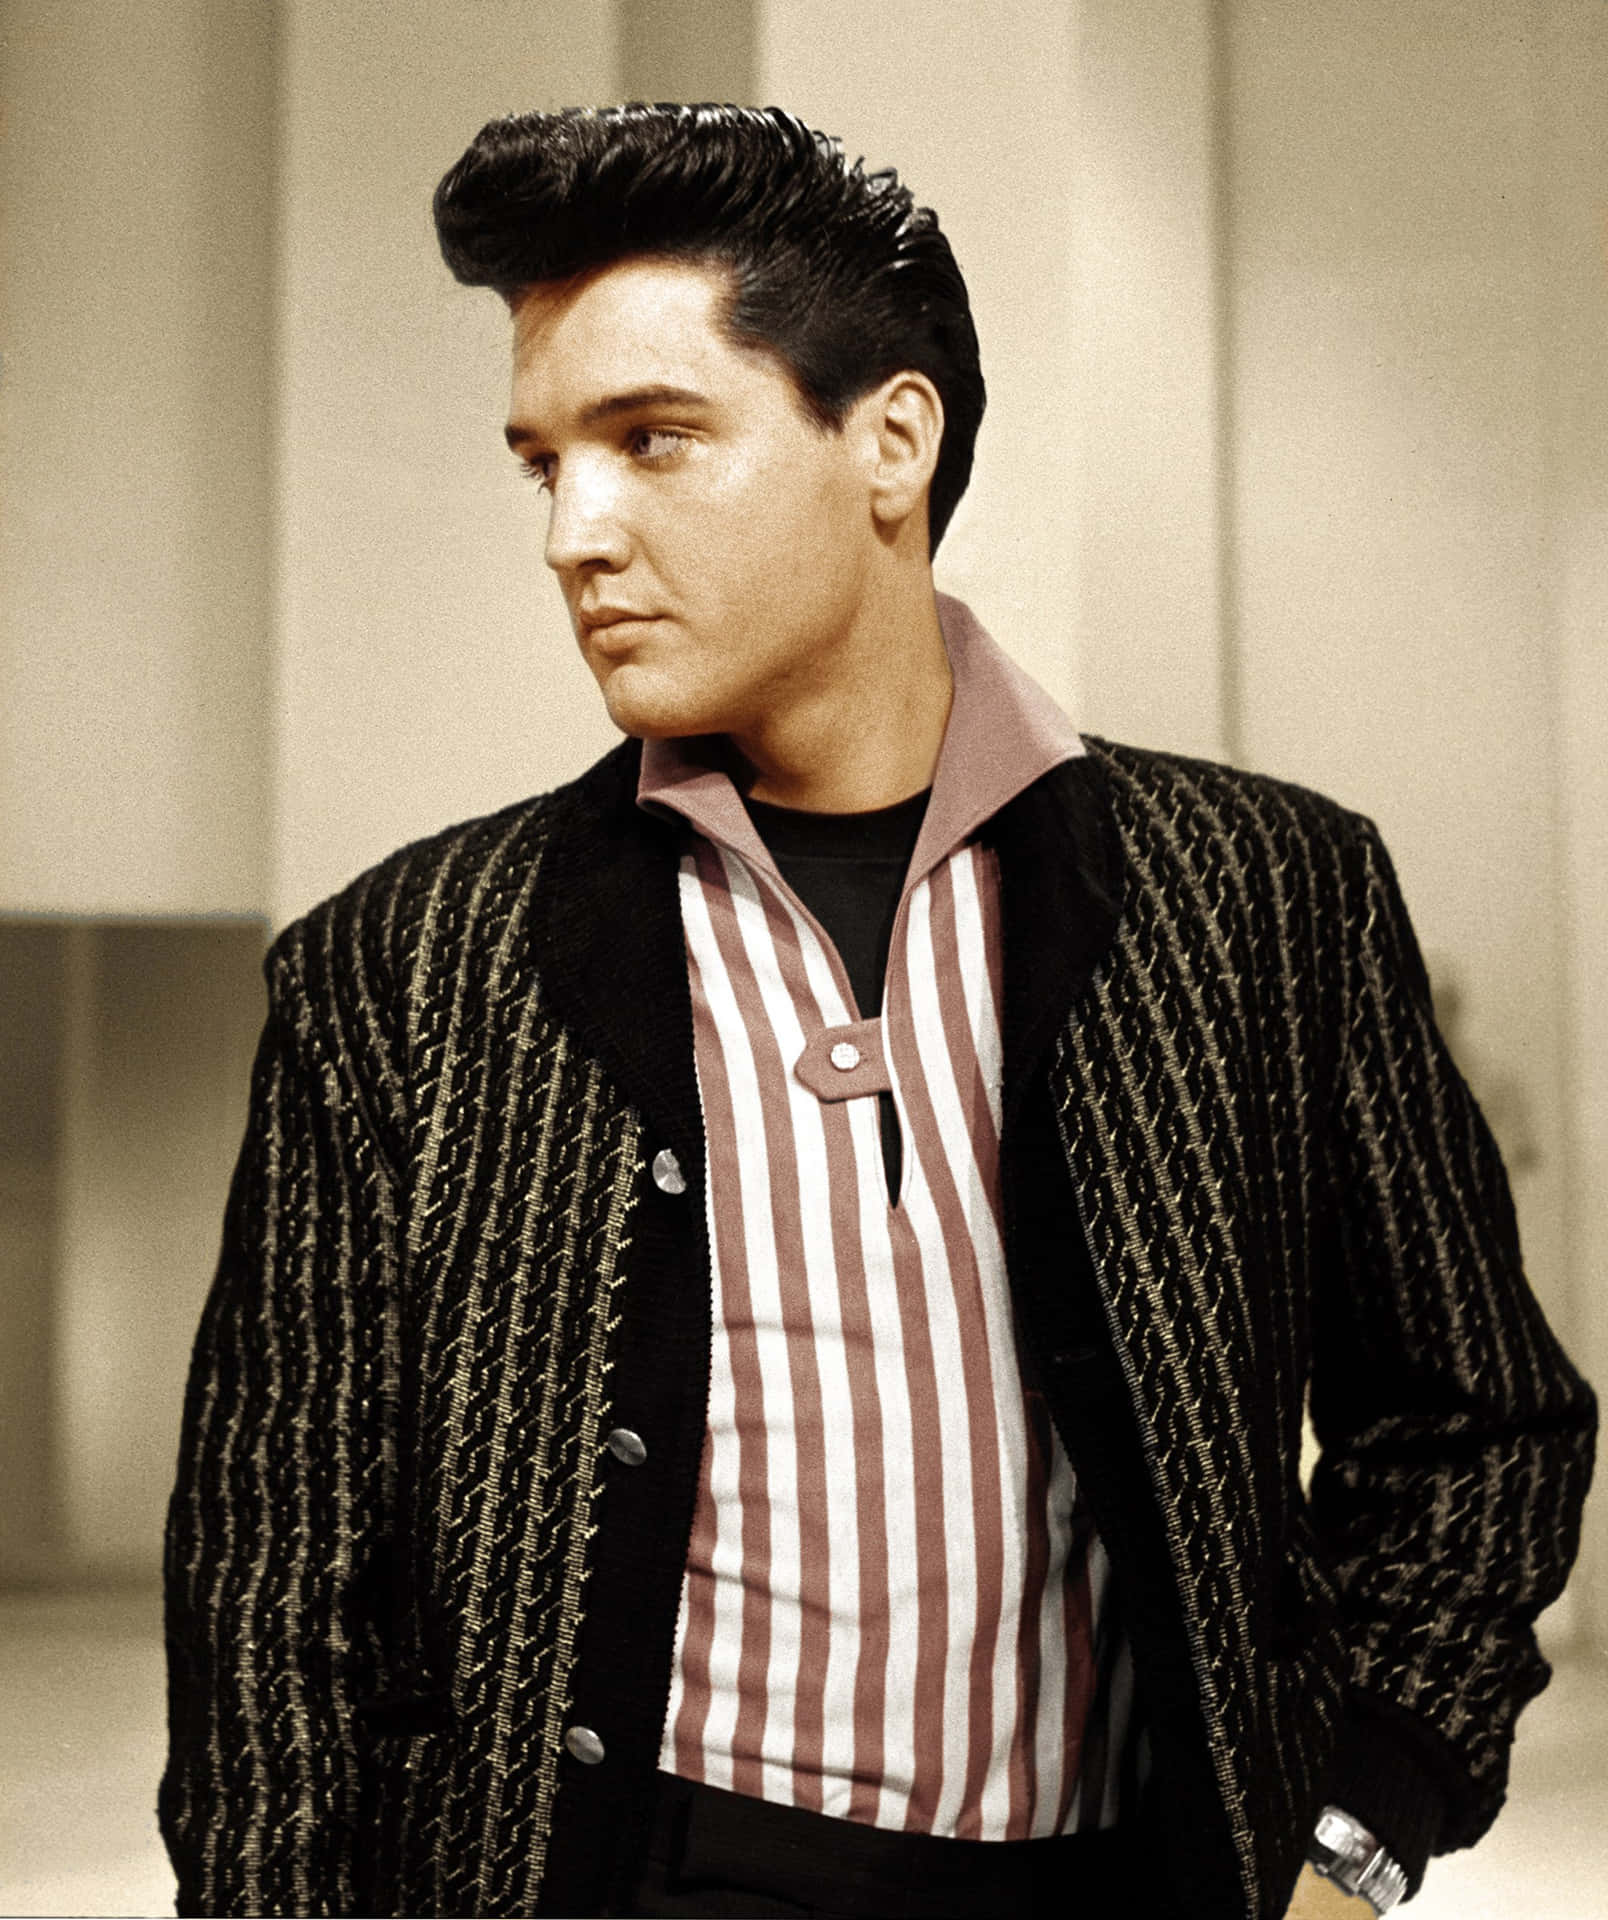 The King of Rock and Roll Elvis Presley